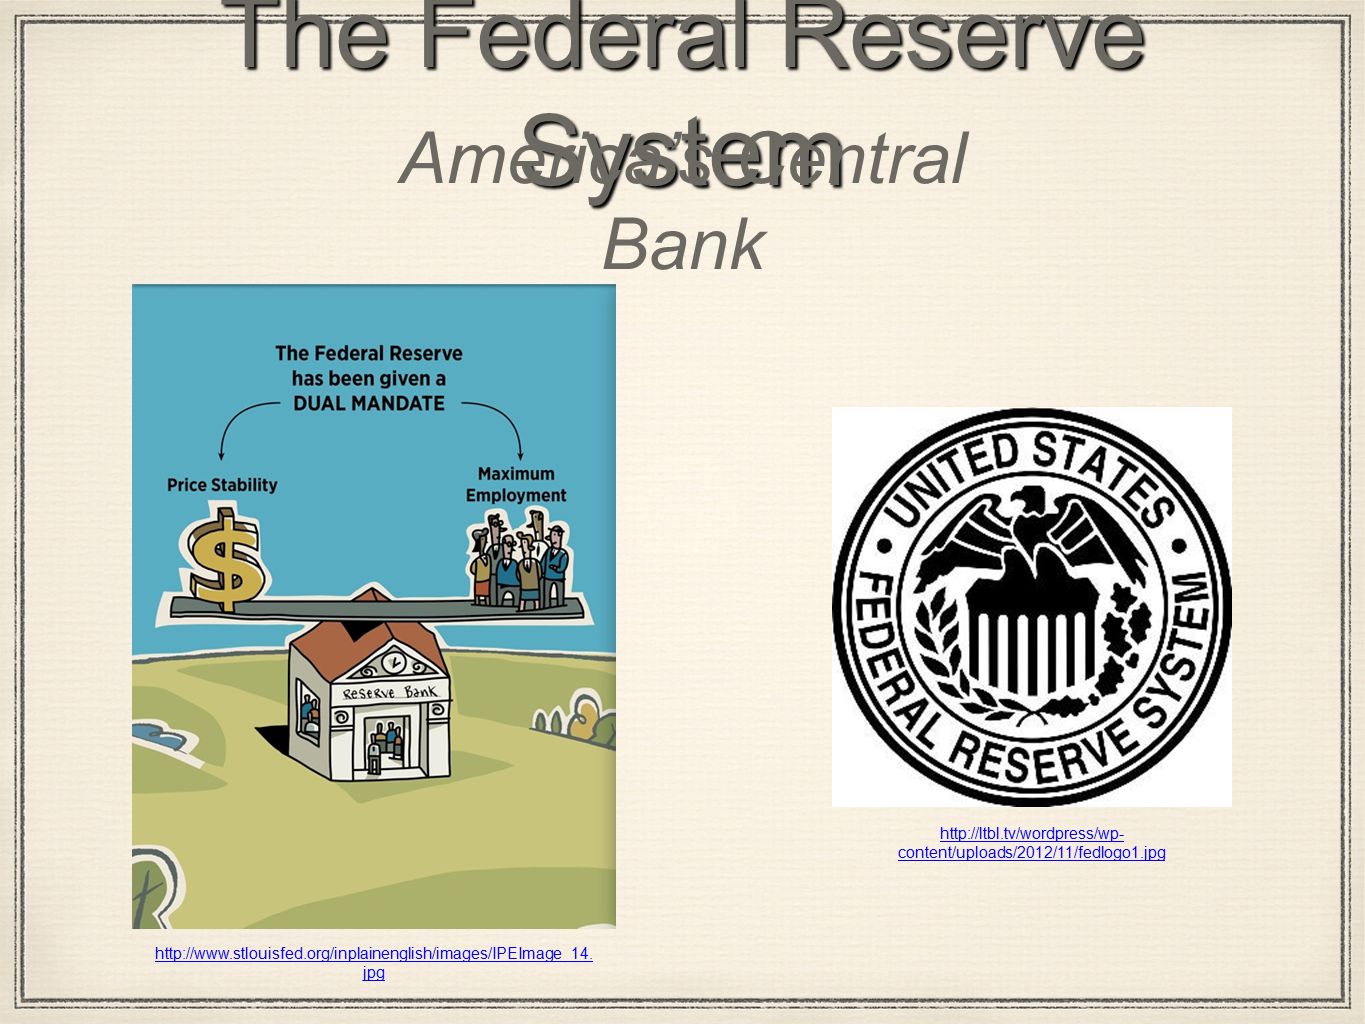 The Federal Reserve System America’s Central Bank   content/uploads/2012/11/fedlogo1.jpg